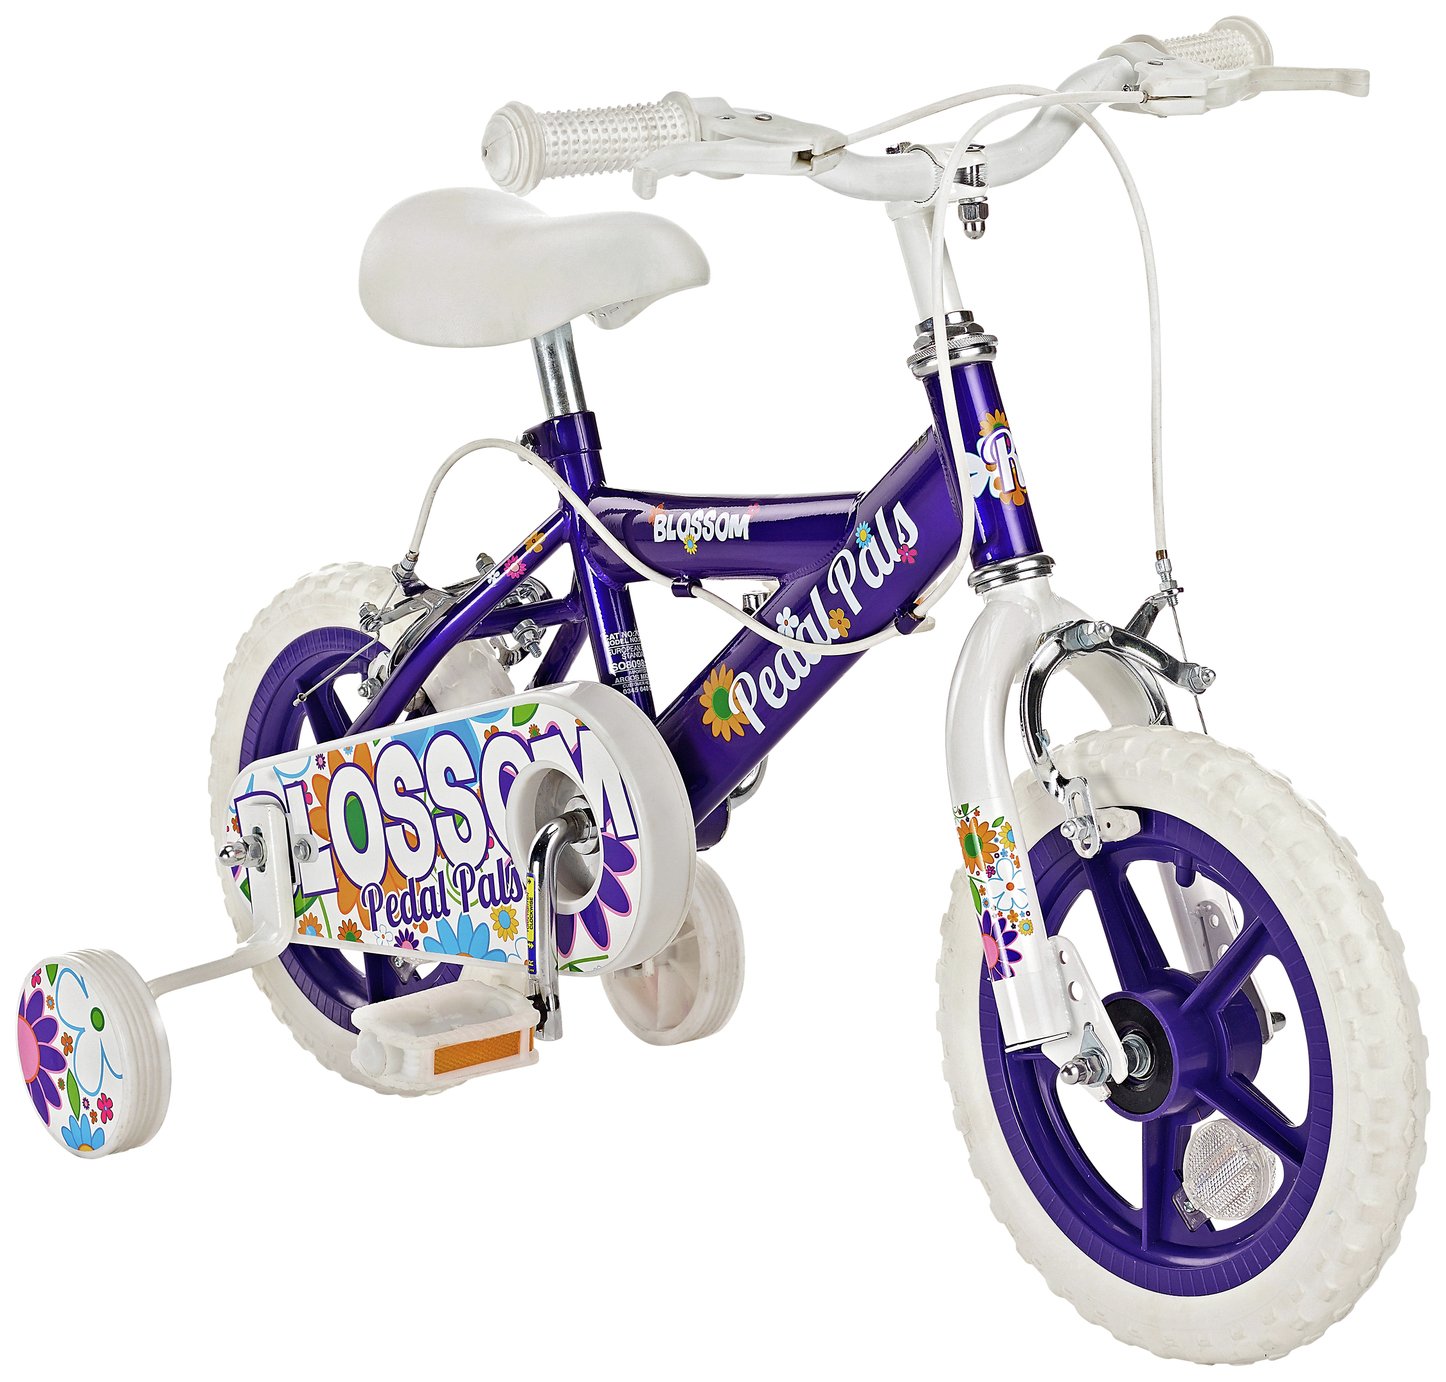 Pedal Pals 12 Inch Blossom Kids Bike review